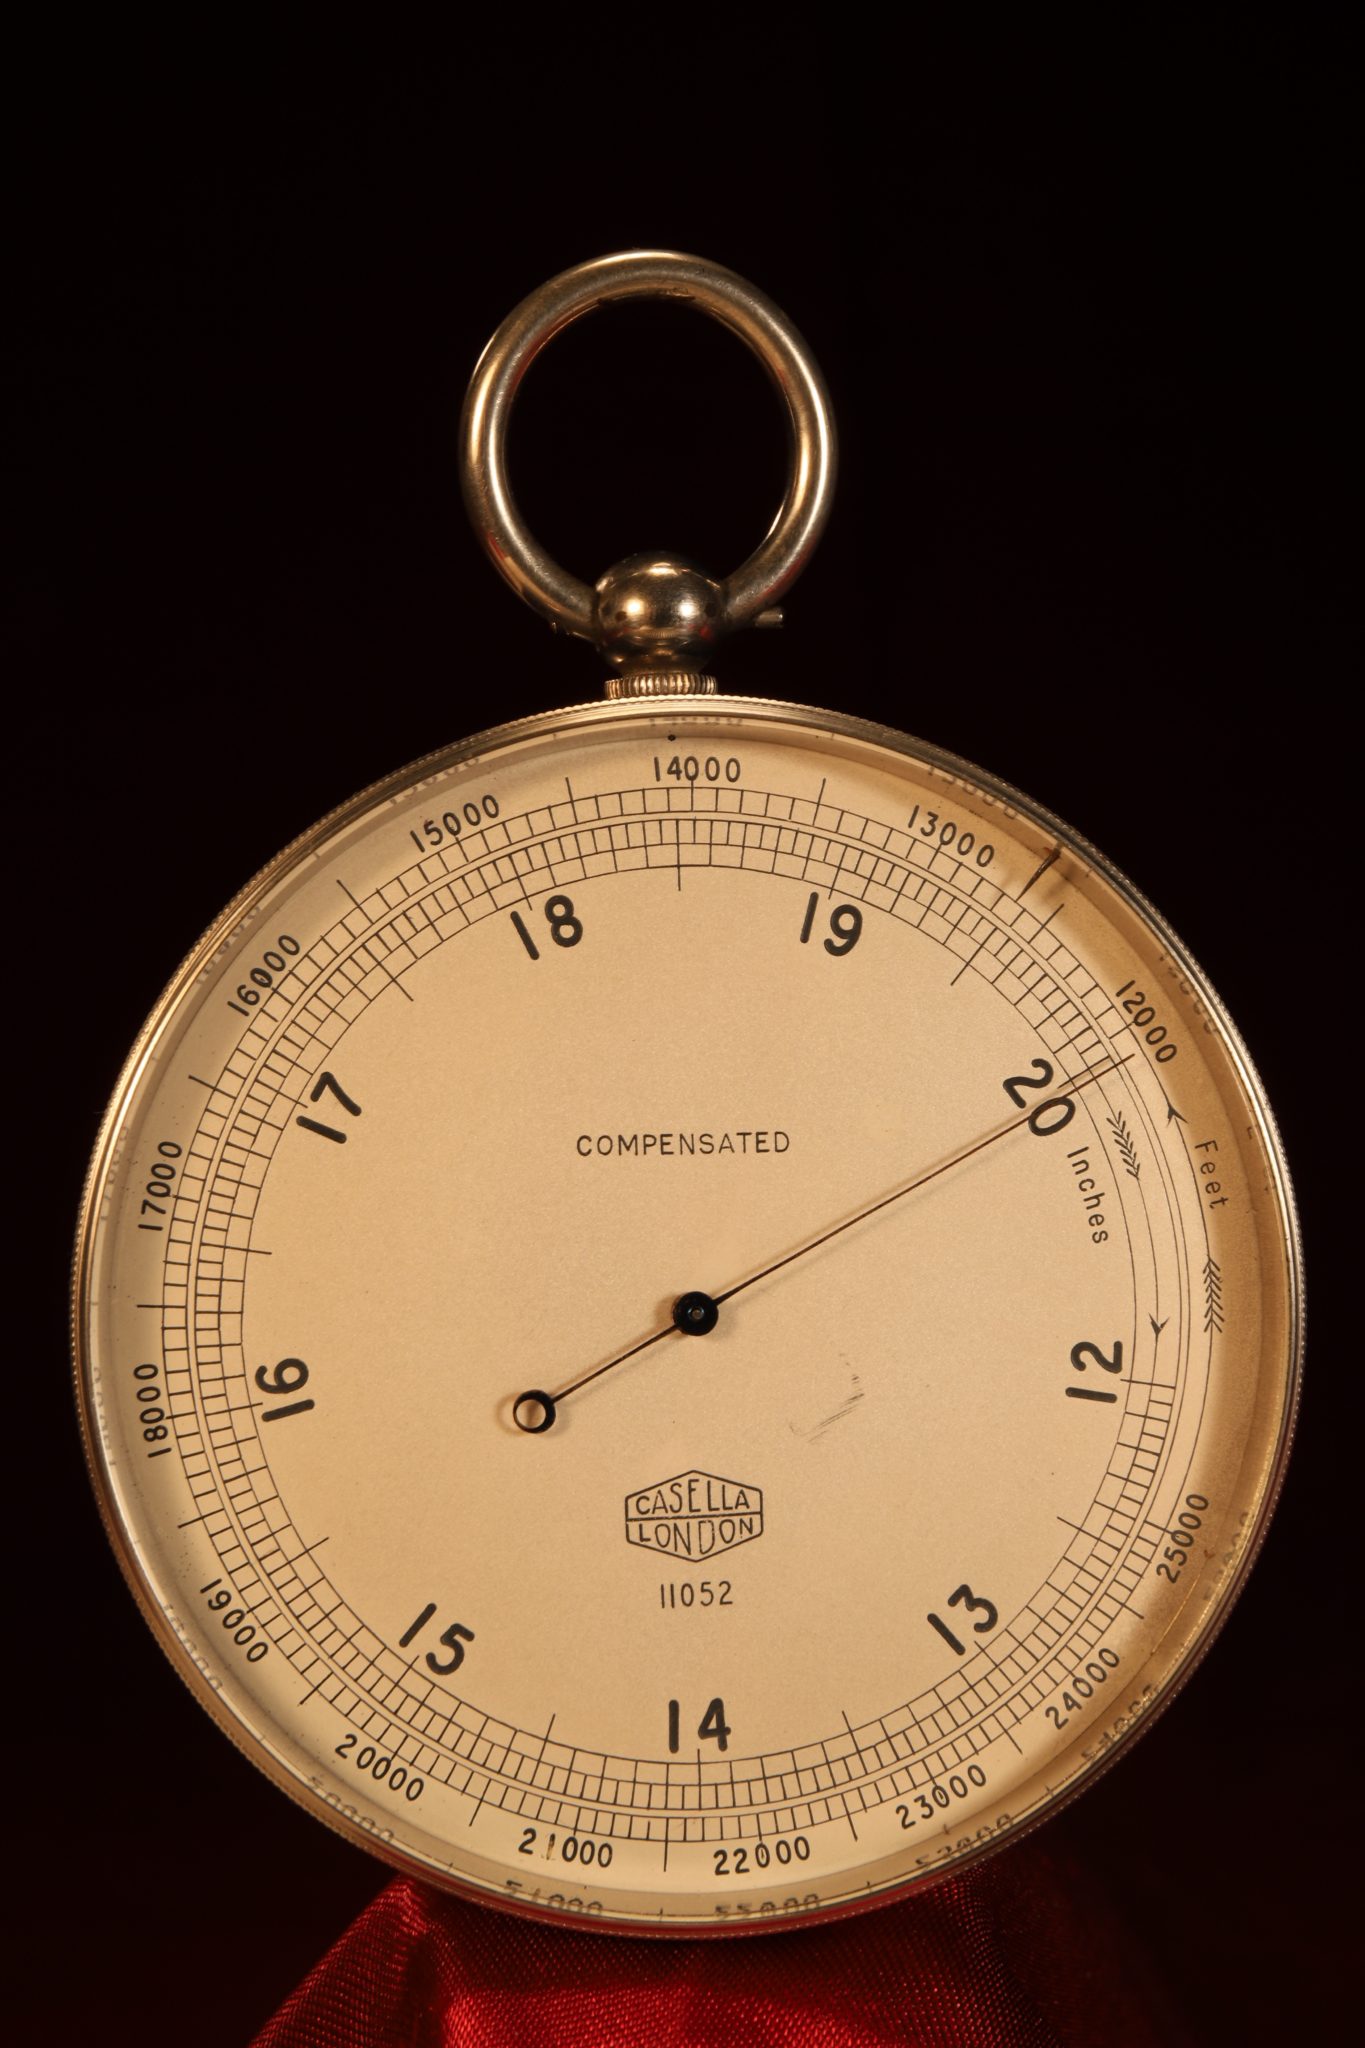 Image of Royal Geographical Society Pocket Altimeter No 59 by Casella